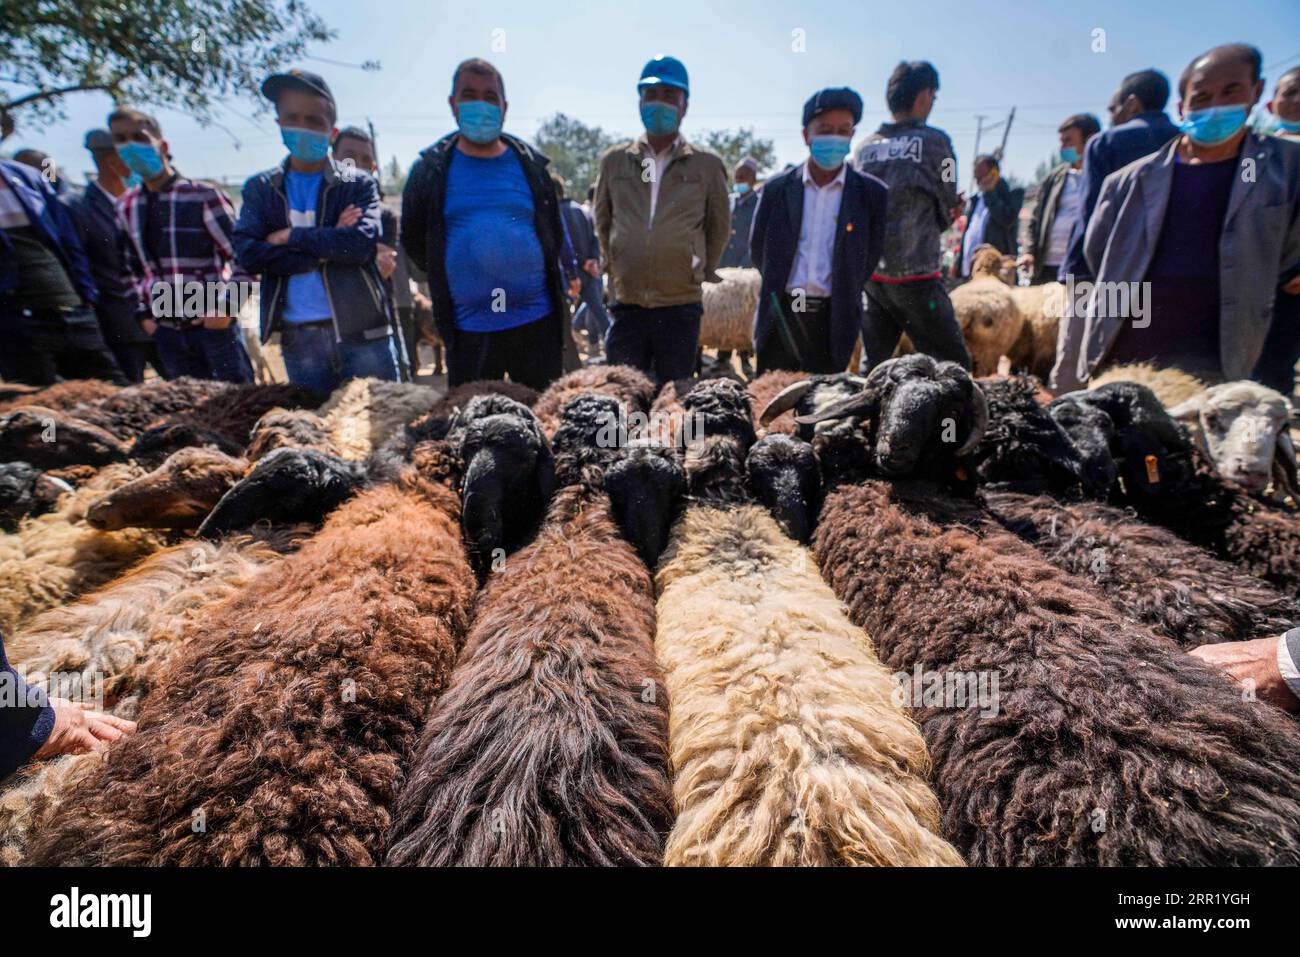 200926 -- SHUFU, Sept. 26, 2020 -- Villagers purchase sheep at a bazaar in a town of Shufu County, northwest China s Xinjiang Uygur Autonomous Region, Sept. 21, 2020. A cattle and sheep bazaar is held at the town in Shufu.  CHINA-XINJIANG-SHUFU-CATTLE-SHEEP-BAZAAR CN ZhaoxGe PUBLICATIONxNOTxINxCHN Stock Photo